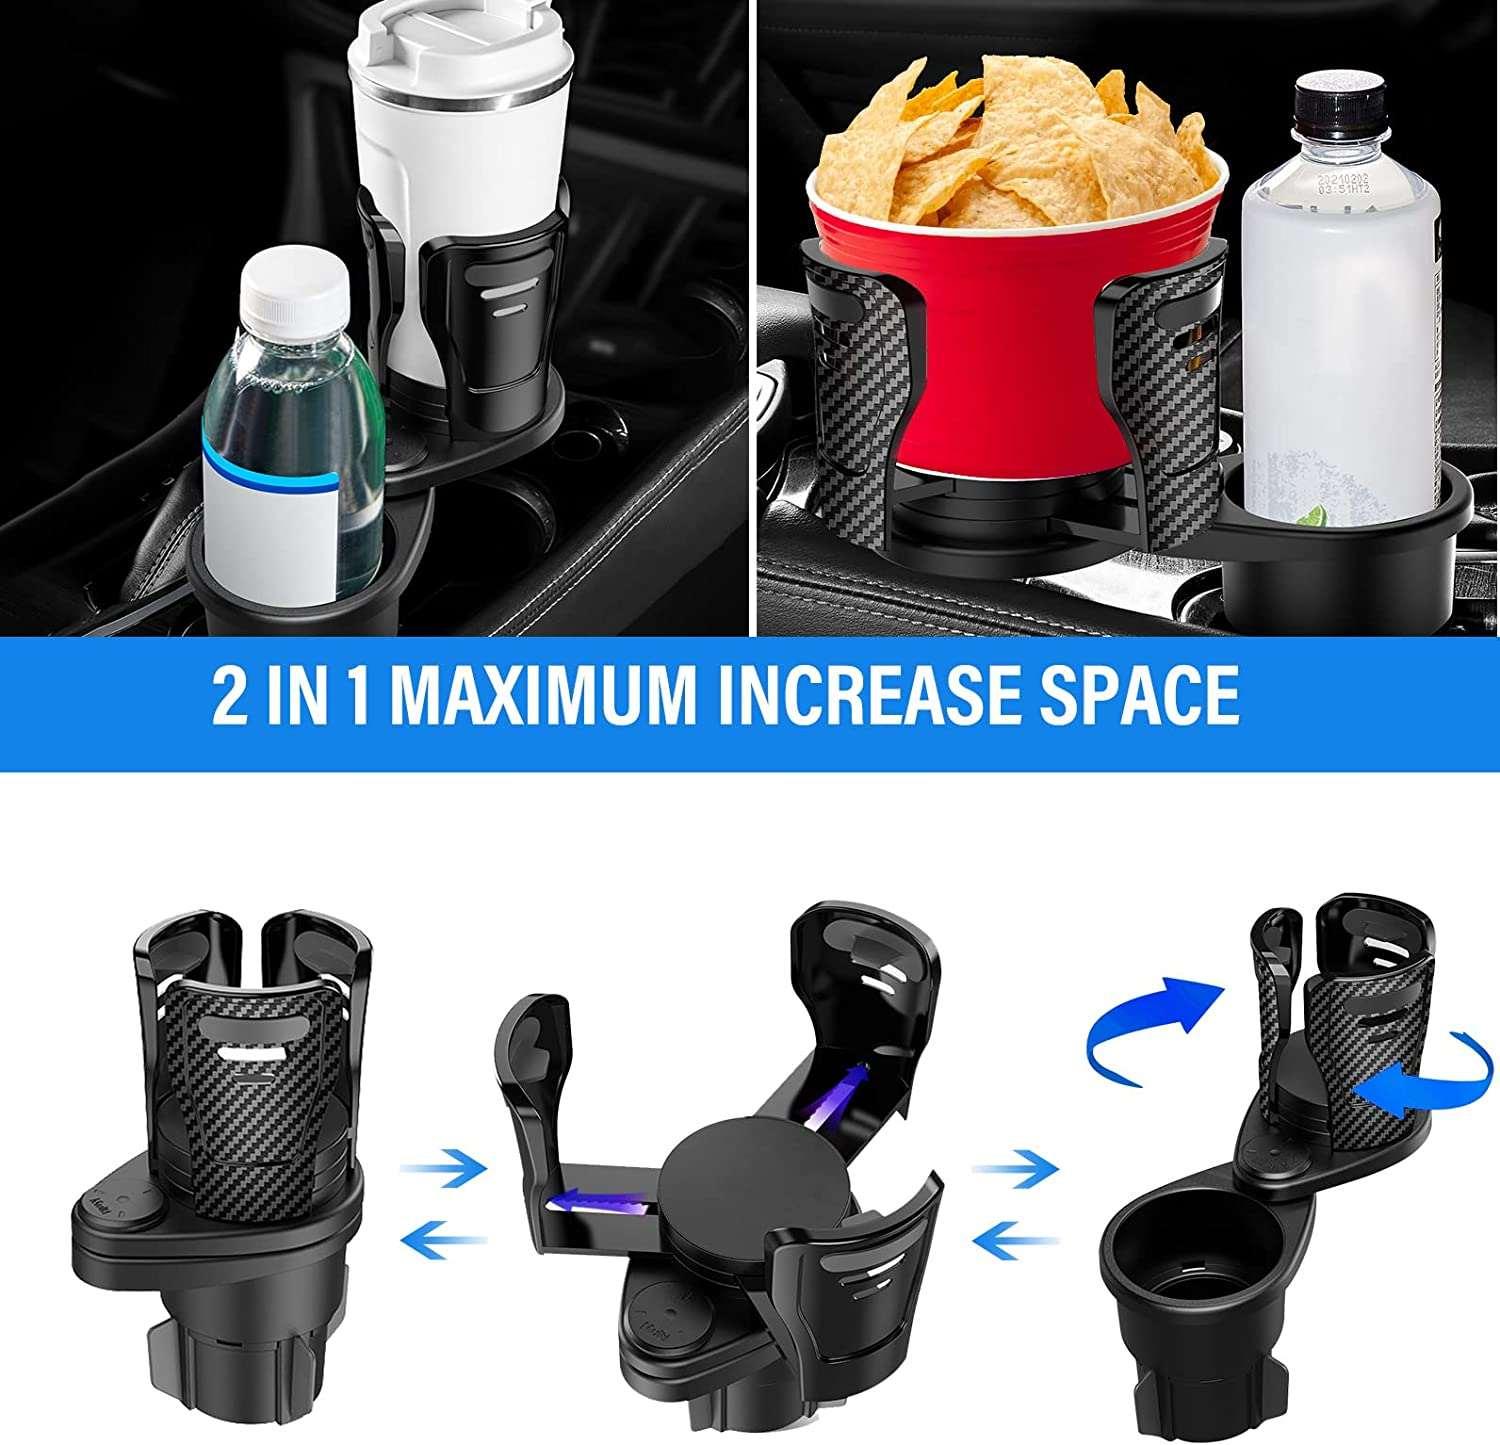 Car Drinking Bottle Holder 360 Degrees Rotatable Water Cup Holder Sunglasses Phone Organizer Storage Car Interior Accessories-pamma store